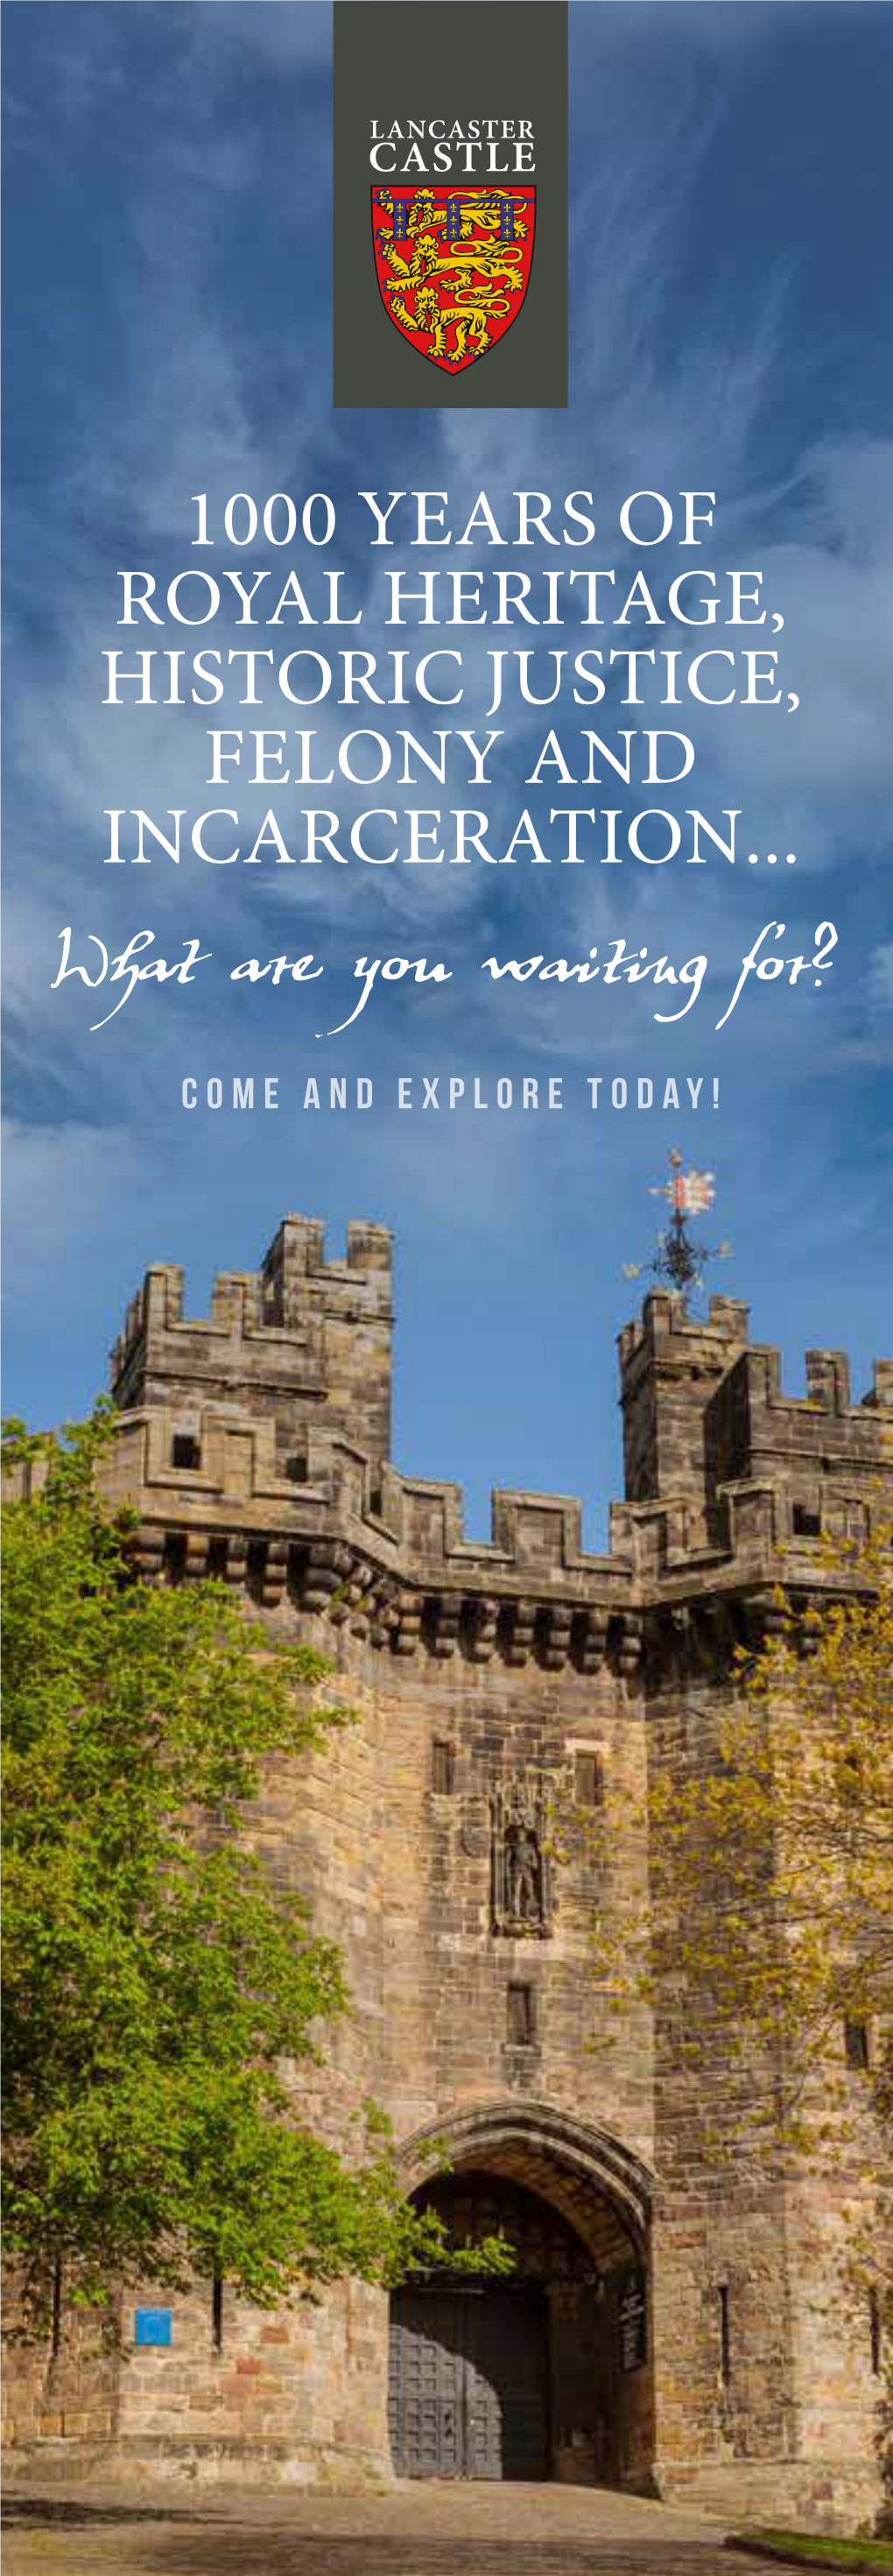 What Are You Waiting For? COME and EXPLORE TODAY! WHAT IS the CASTLE’S WHAT’S SO SPECIAL ABOUT ROYAL CONNECTION? LANCASTER CASTLE?